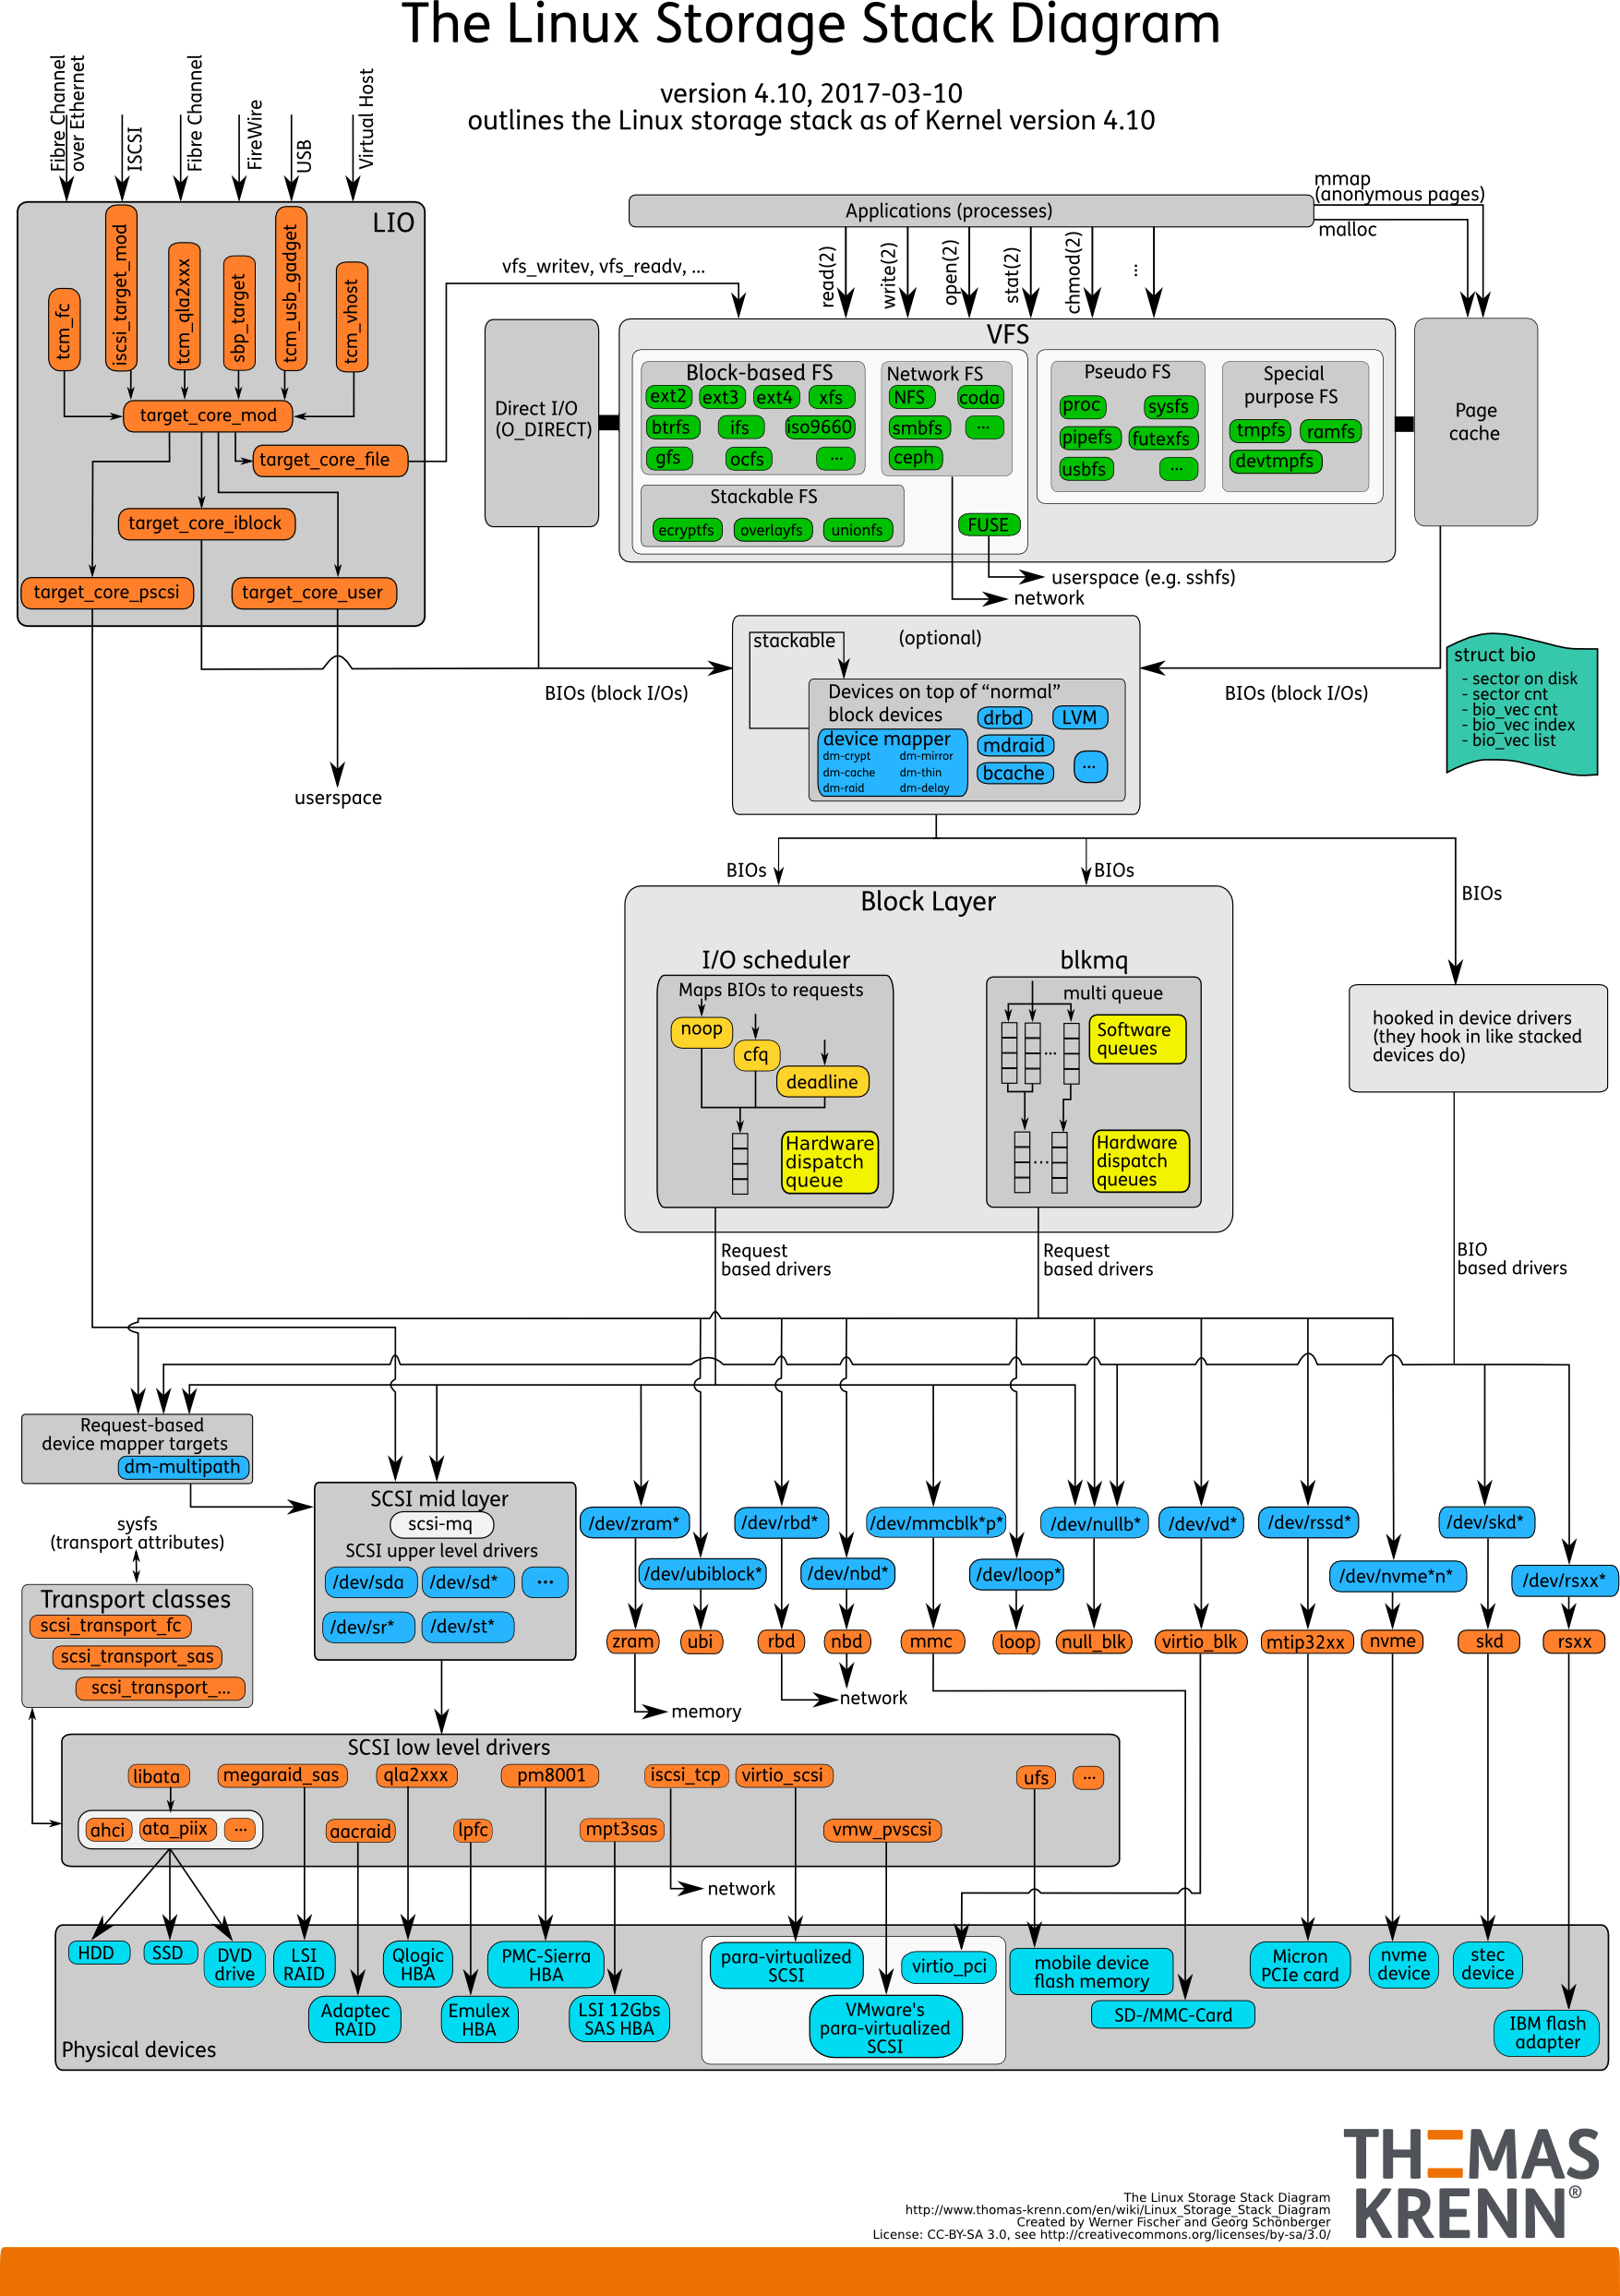 ../_images/THE-LINUX-STORAGE-STACK-DIAGRAM.png